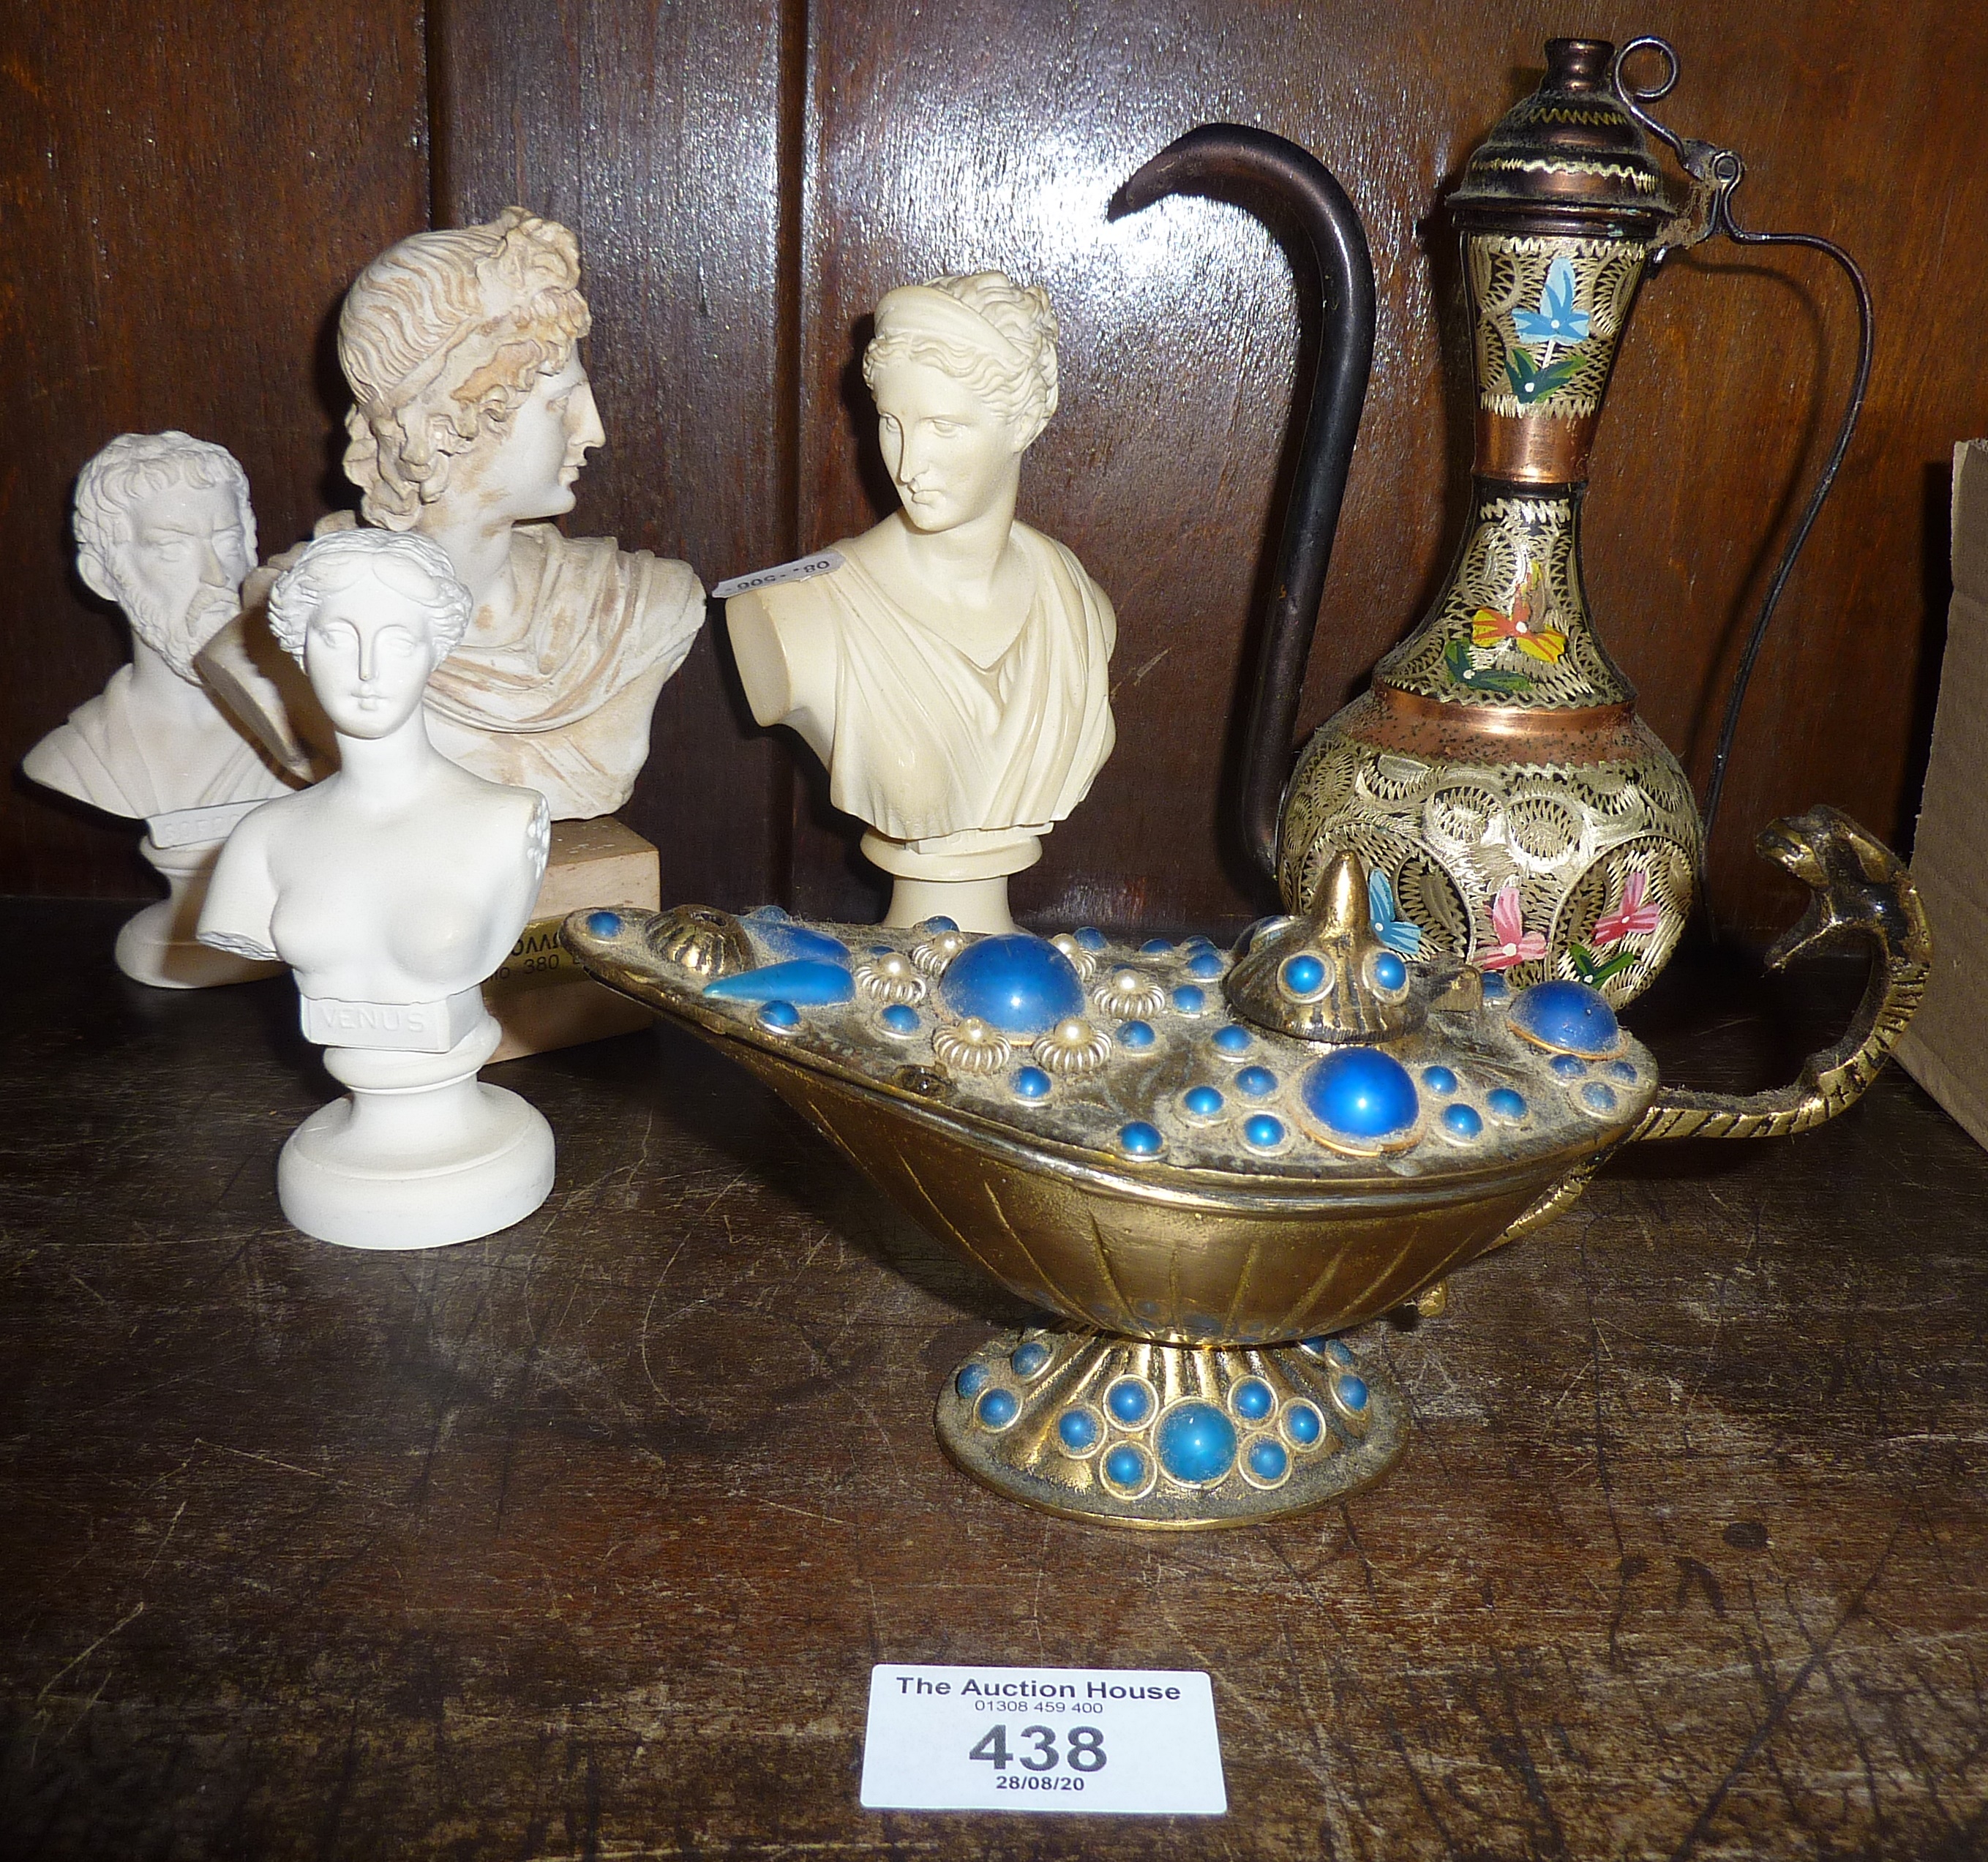 Four small resin classical busts, a brass 'Aladdin' spirit lamp encrusted with blue stones